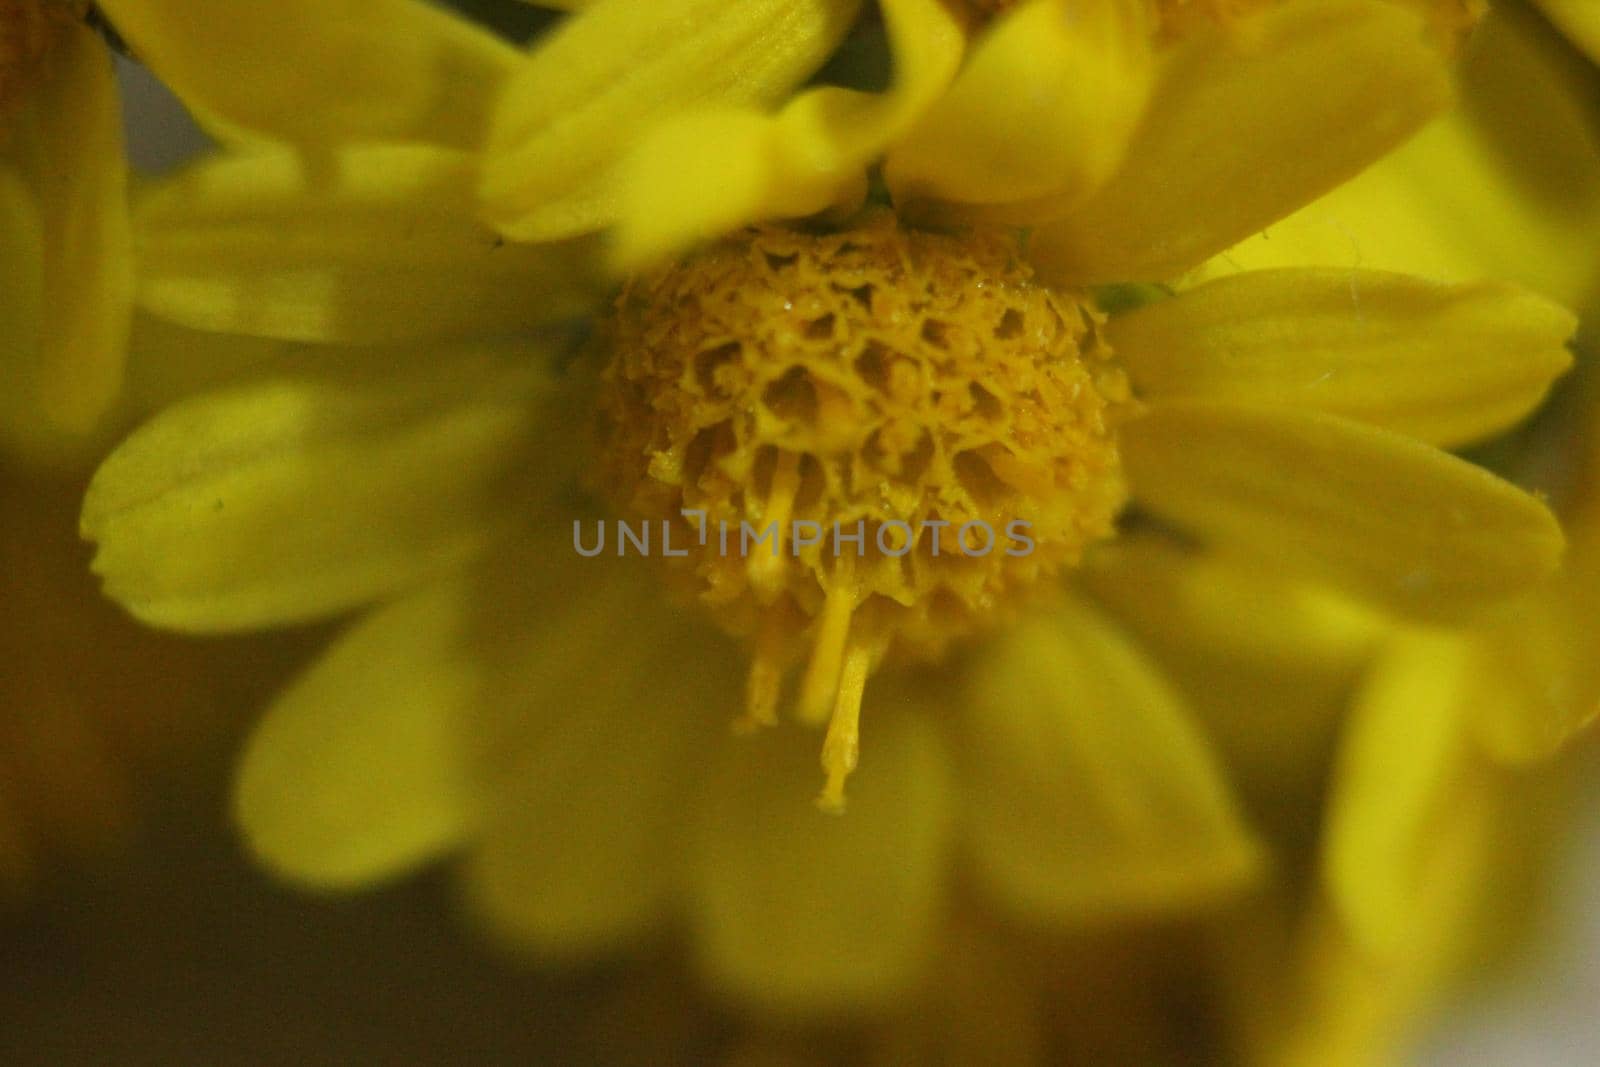 Close-up and macro photo with selective focus of marigold (calendula) flowers. Yellow daisy flowers of calendula arvensis.